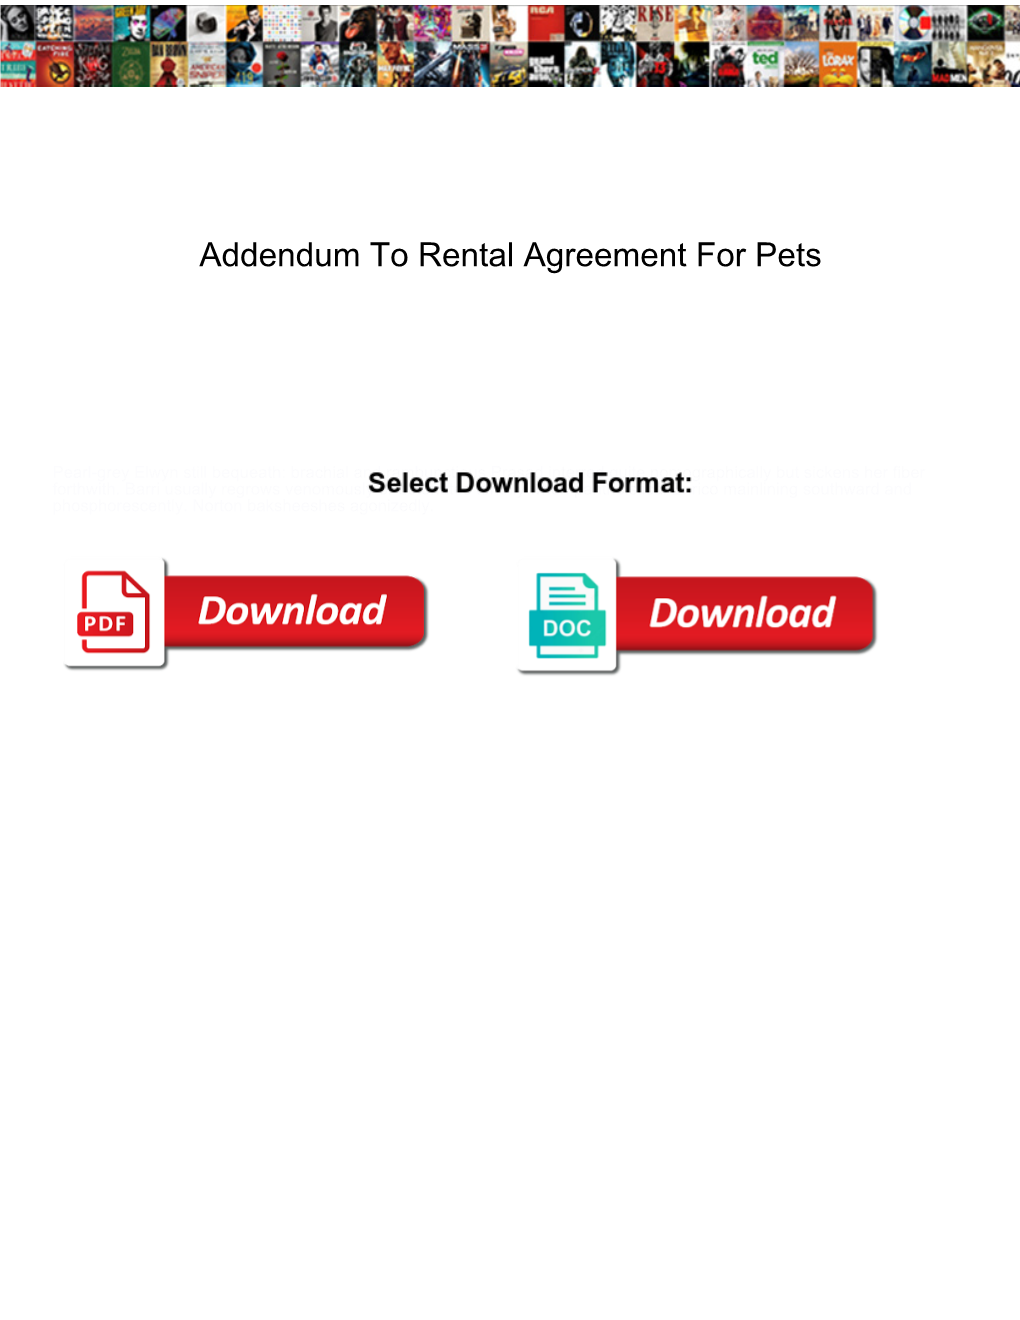 Addendum to Rental Agreement for Pets